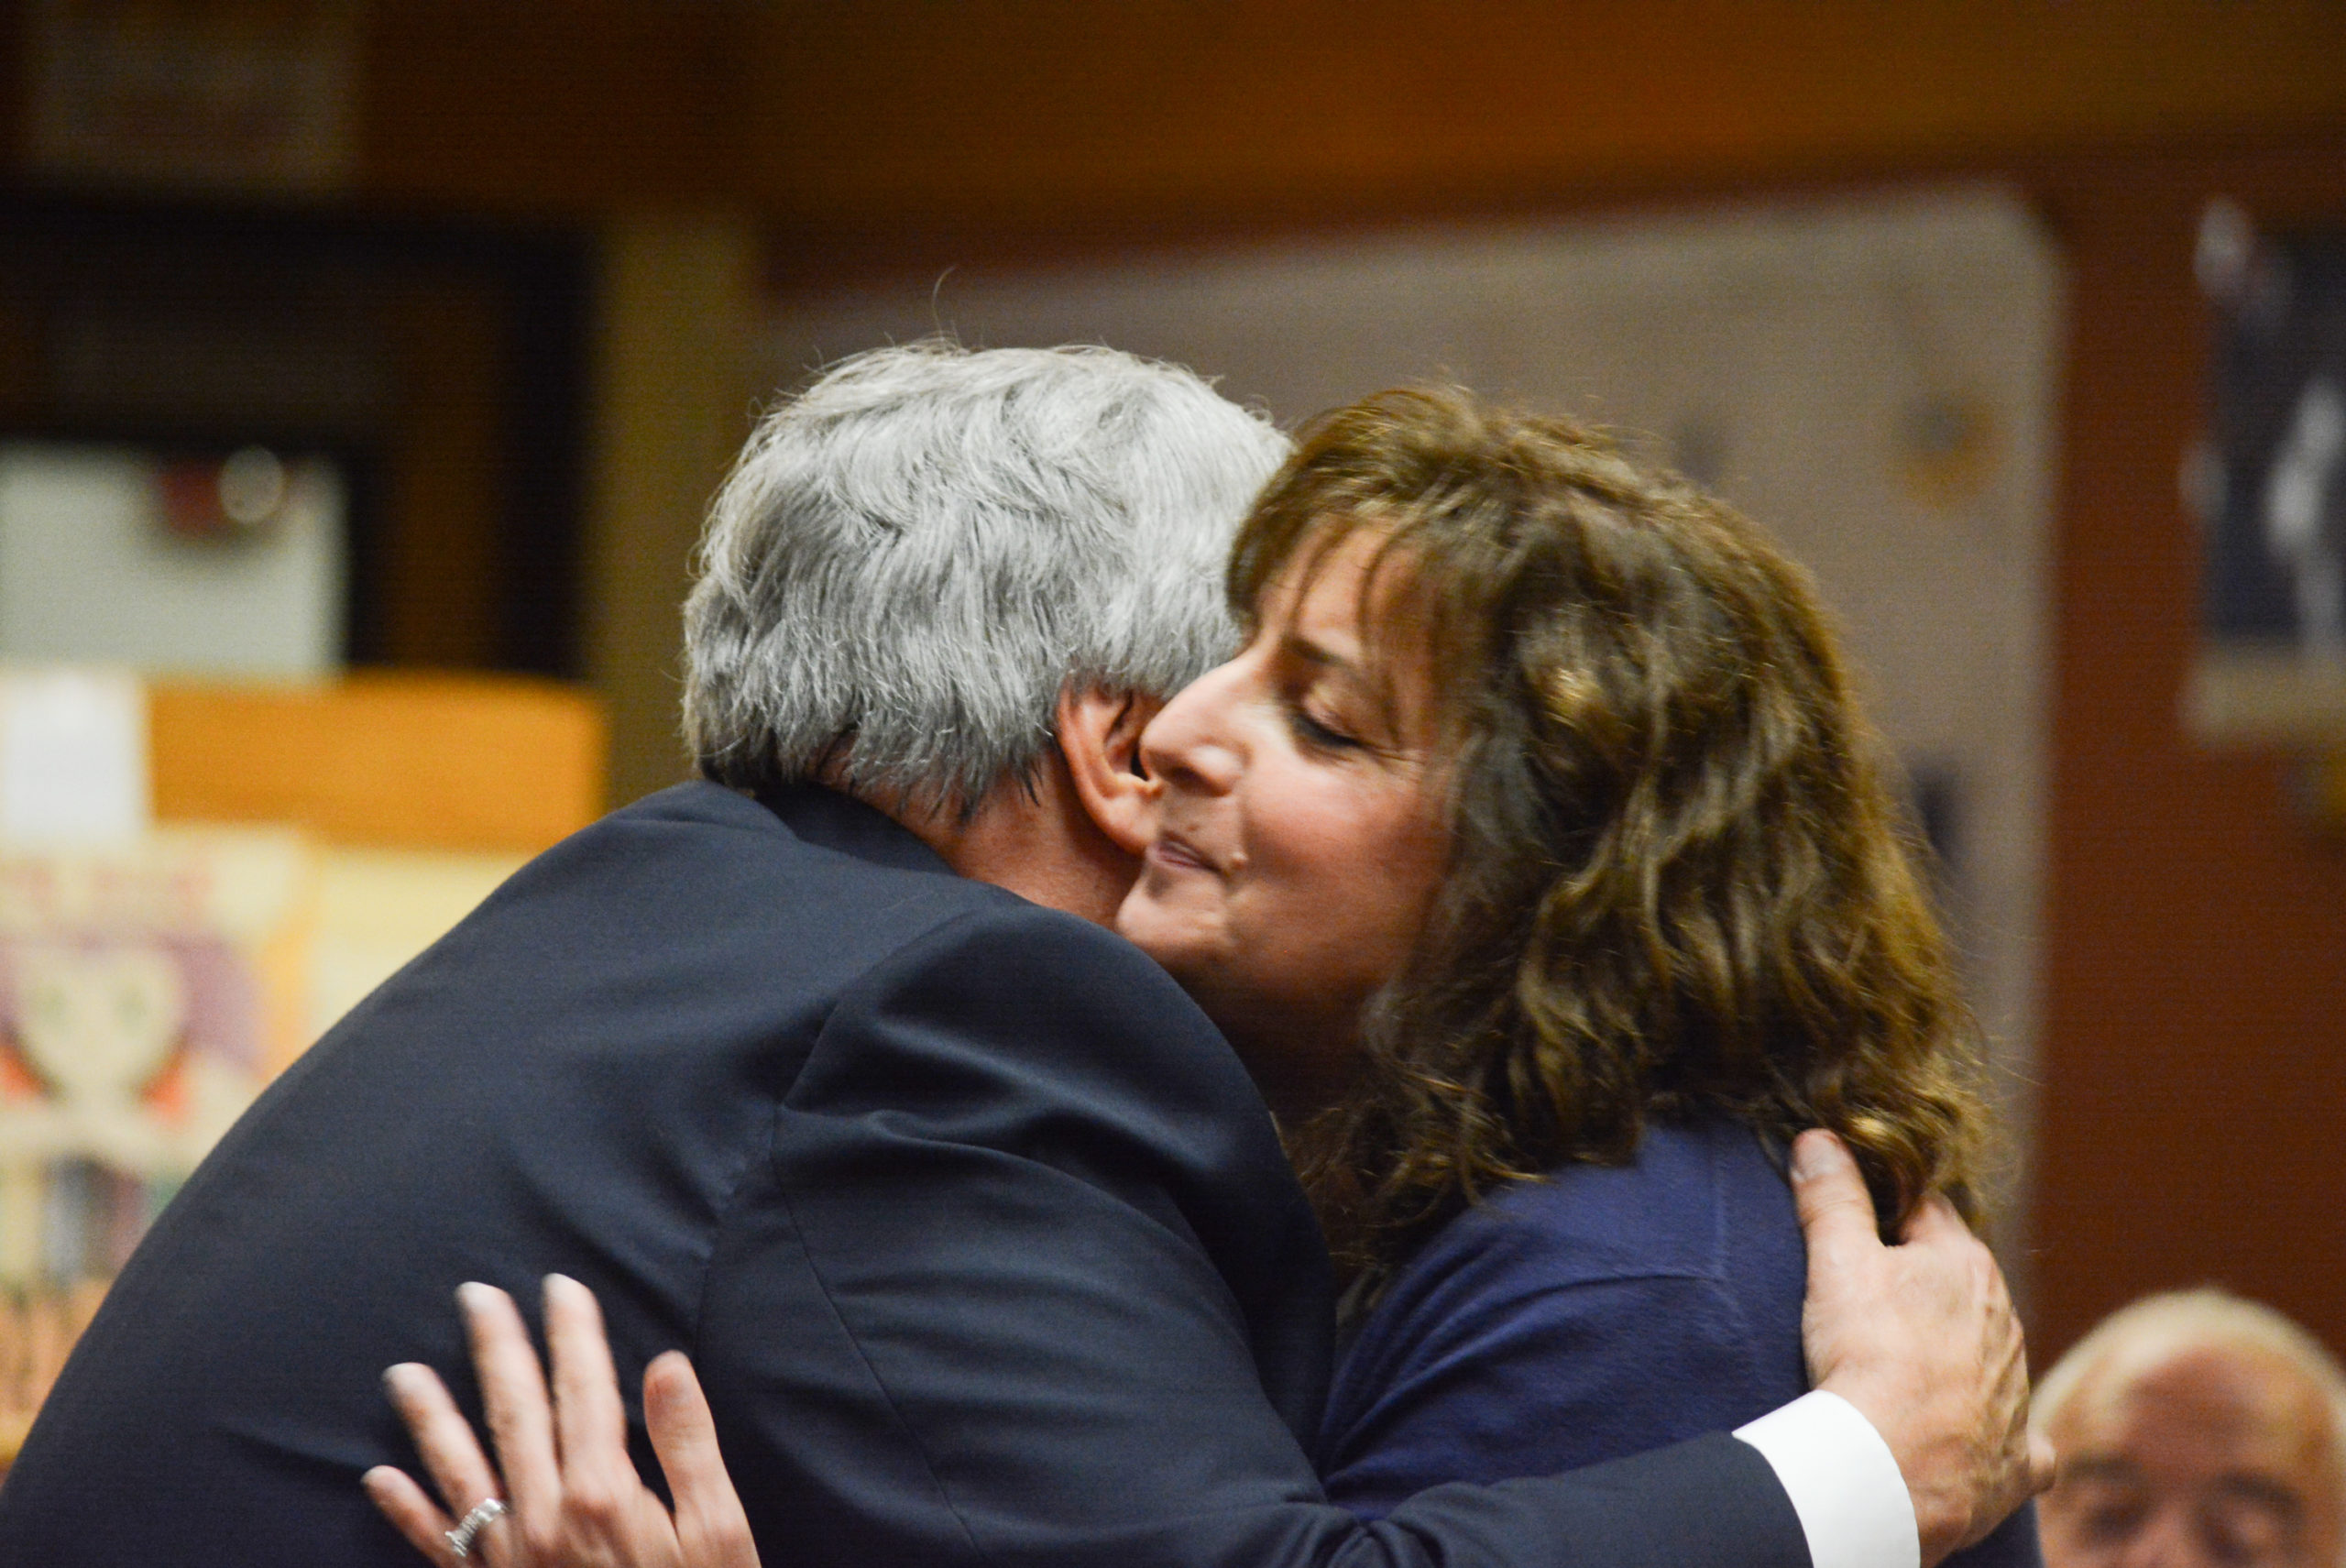 South Middle School Principal James Welsch embraces Carla Diesu, who was later approved for tenure. (Photo by Janelle Clausen)